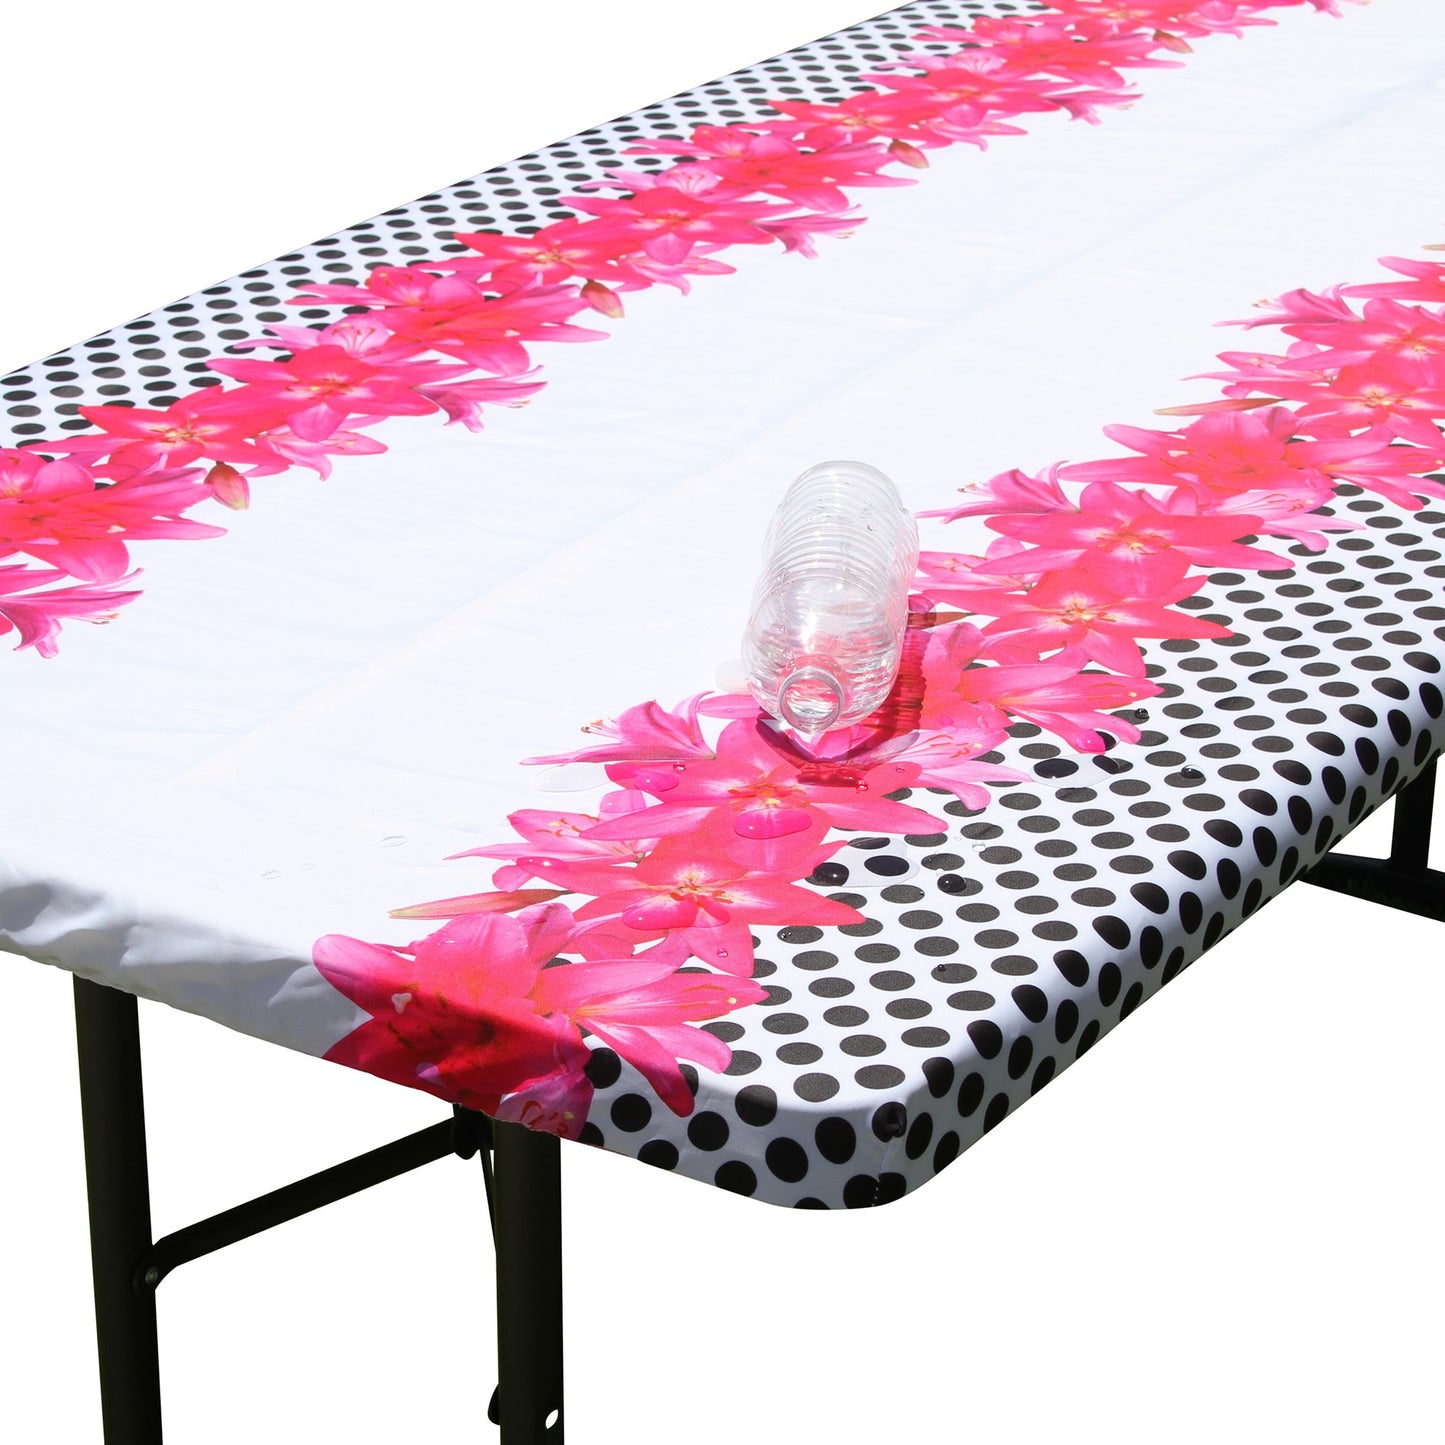 Water beading up on the water resistant surface of TableCloth PLUS 72" Lilies Fitted Polyester Tablecloth for 6' Folding Tables